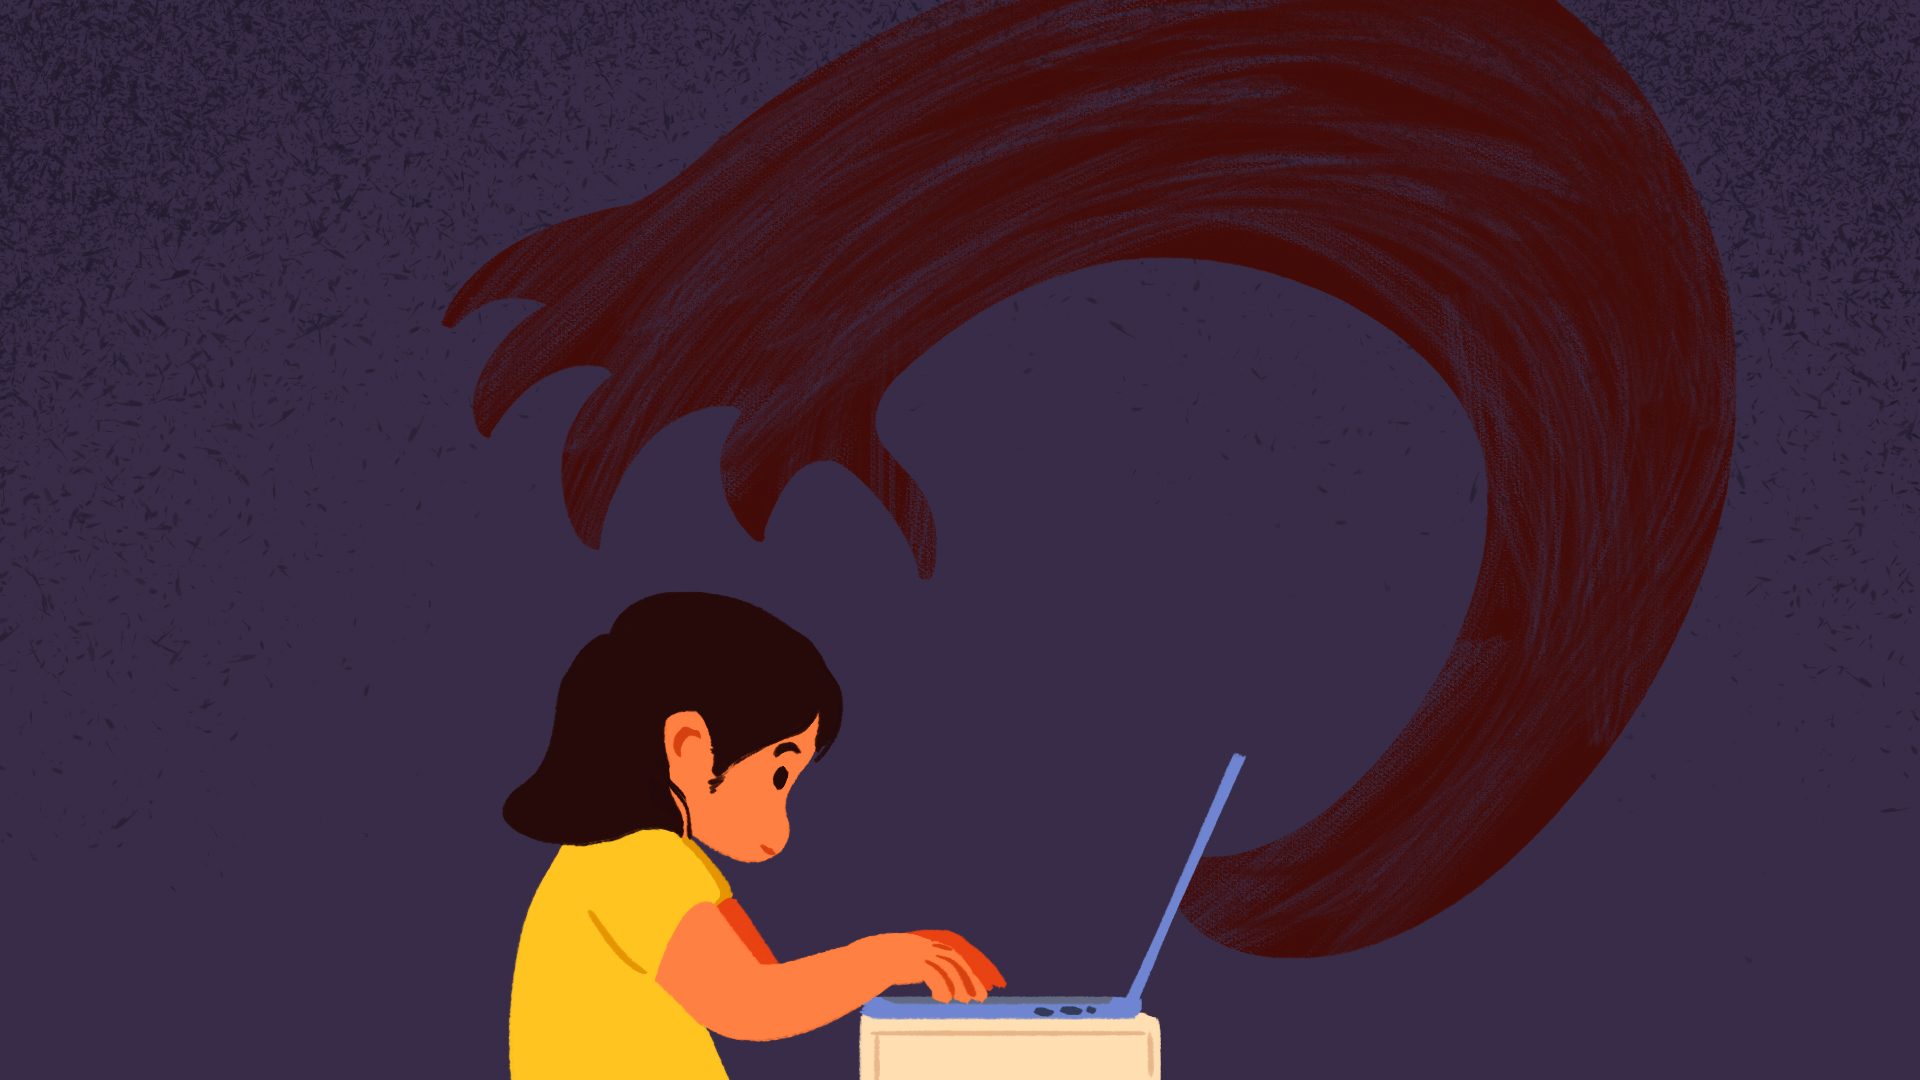 Are there safeguards vs sexual exploitation as children shift to online learning?